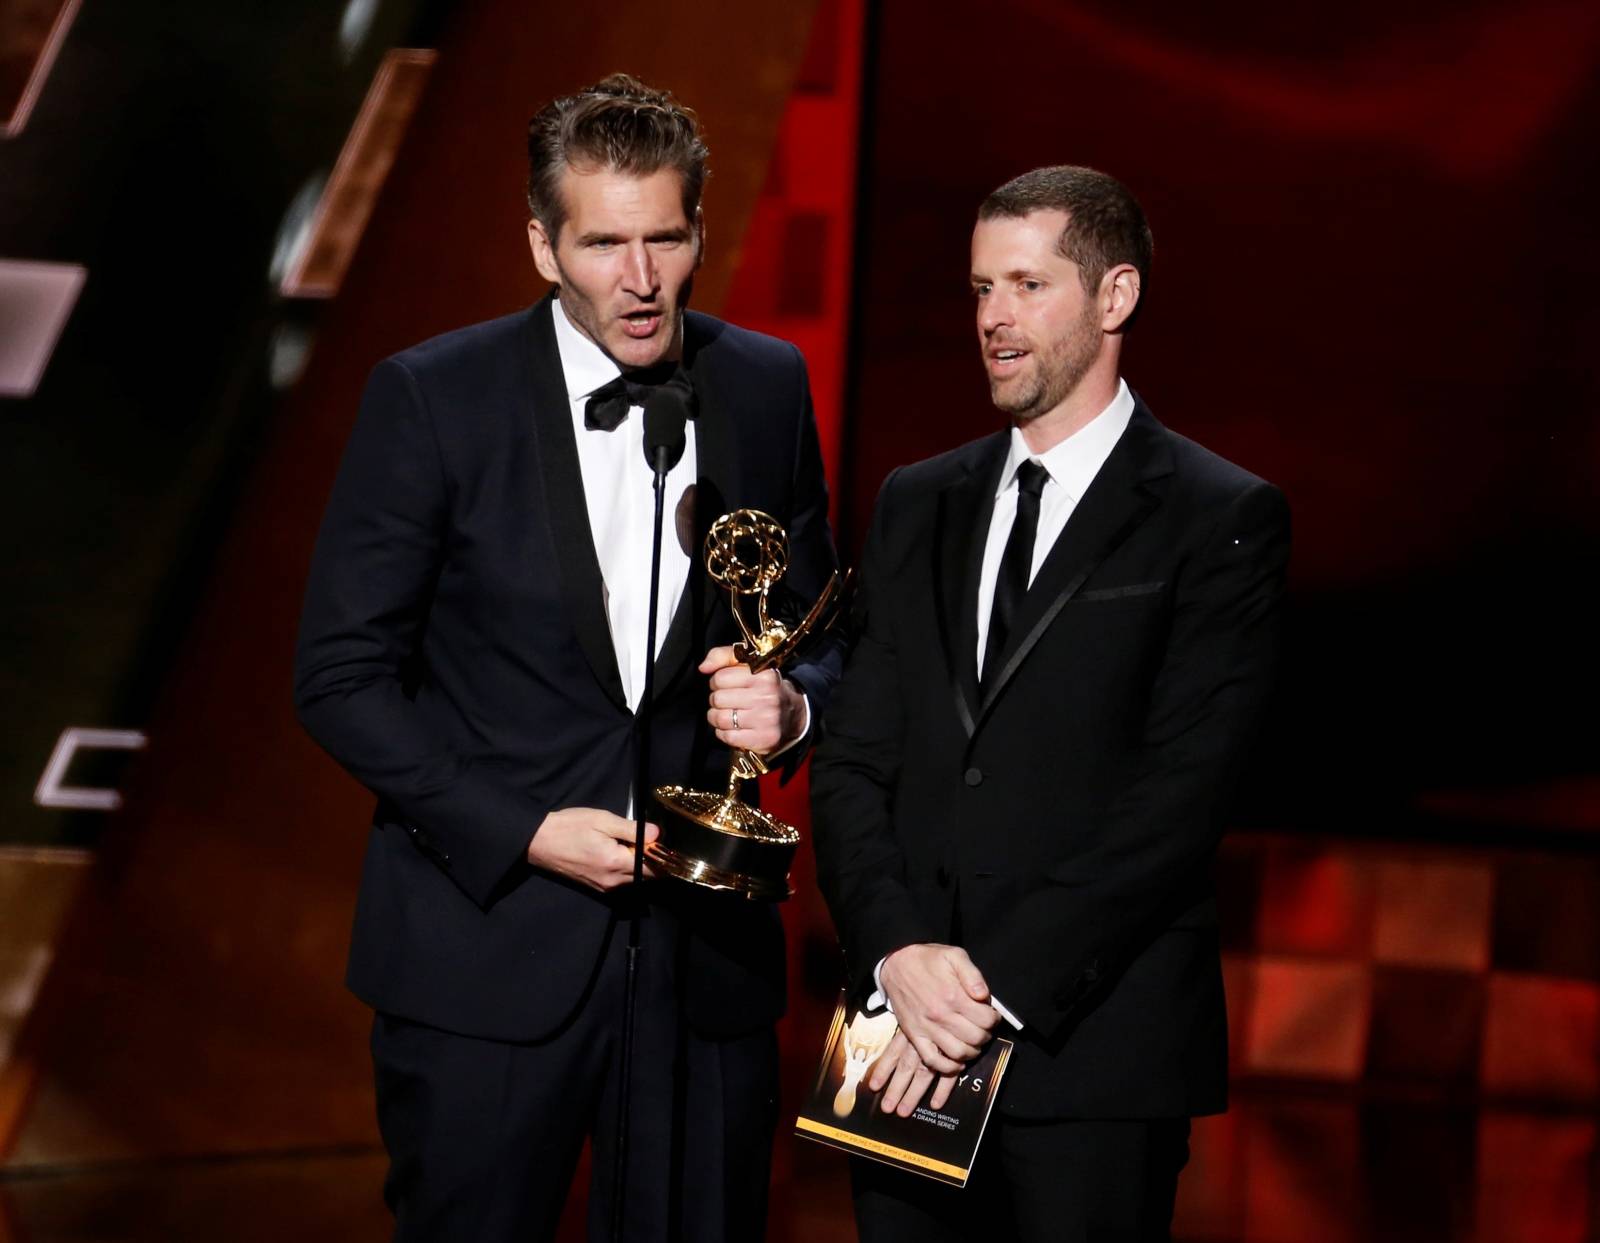 FILE PHOTO: Benioff and Weiss accept the award for Outstanding Writing For A Drama Series for HBO's "Game of Thrones" at the 67th Primetime Emmy Awards in Los Angeles